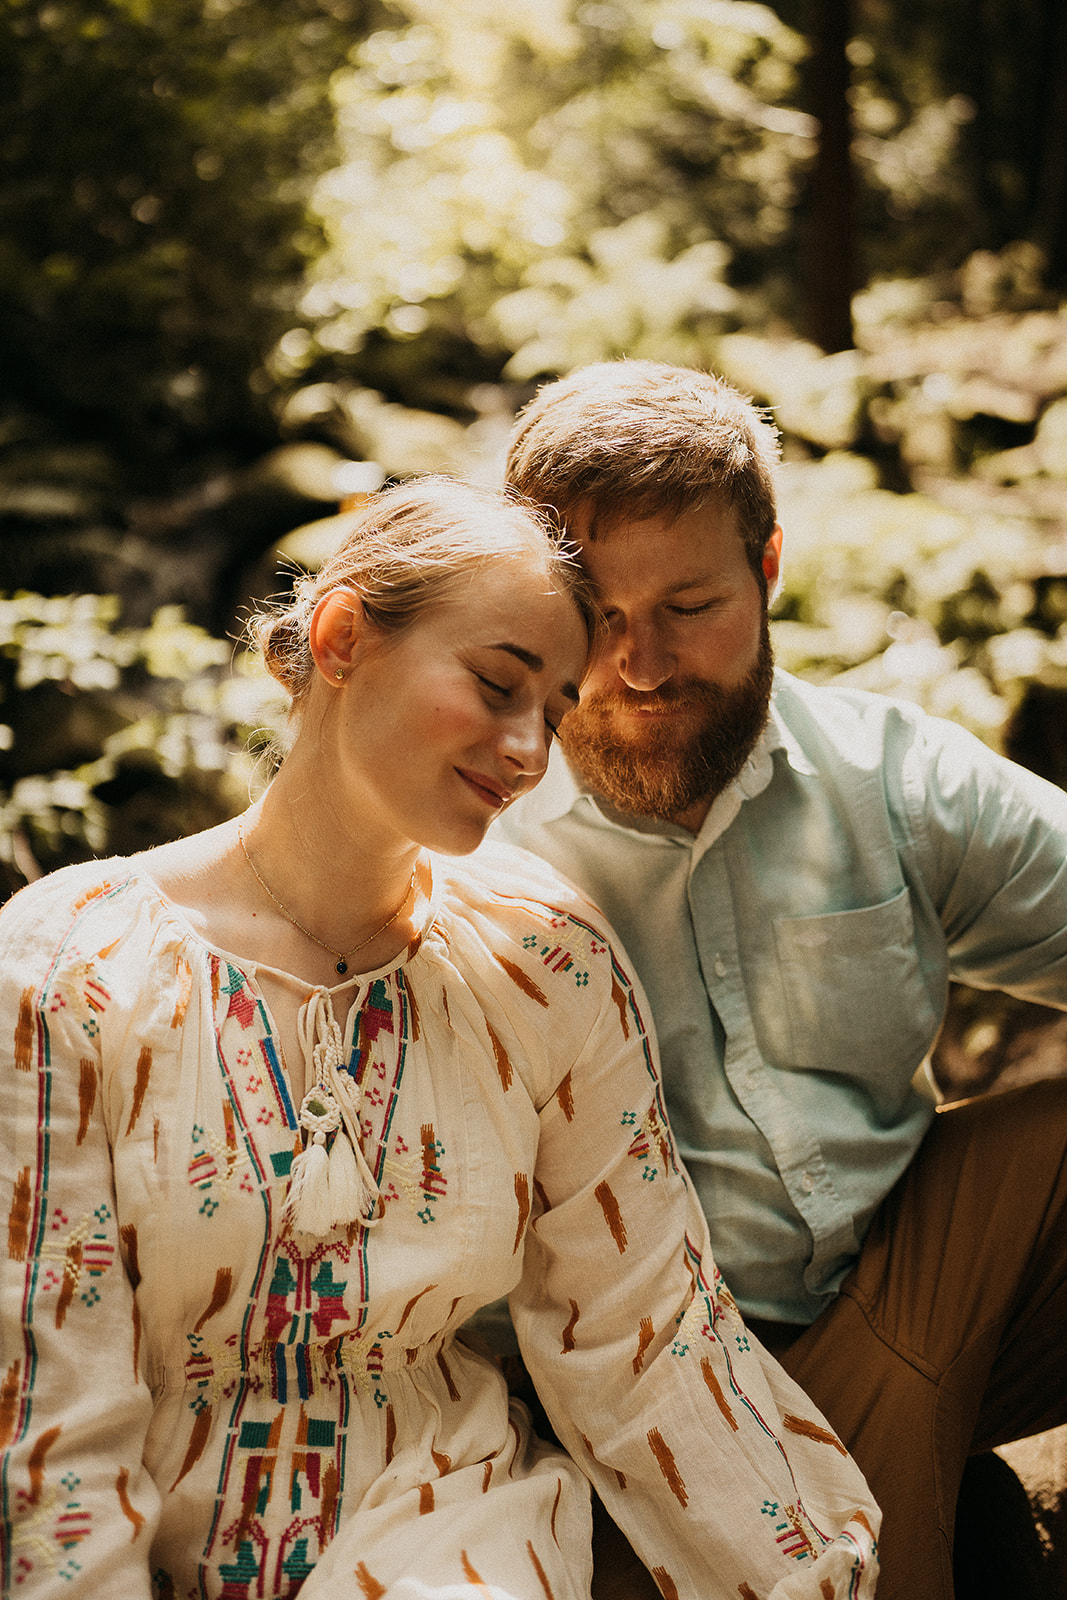 Wyming Brook Nature Reserve Engagement Shoot | Sheffield Couples Photos